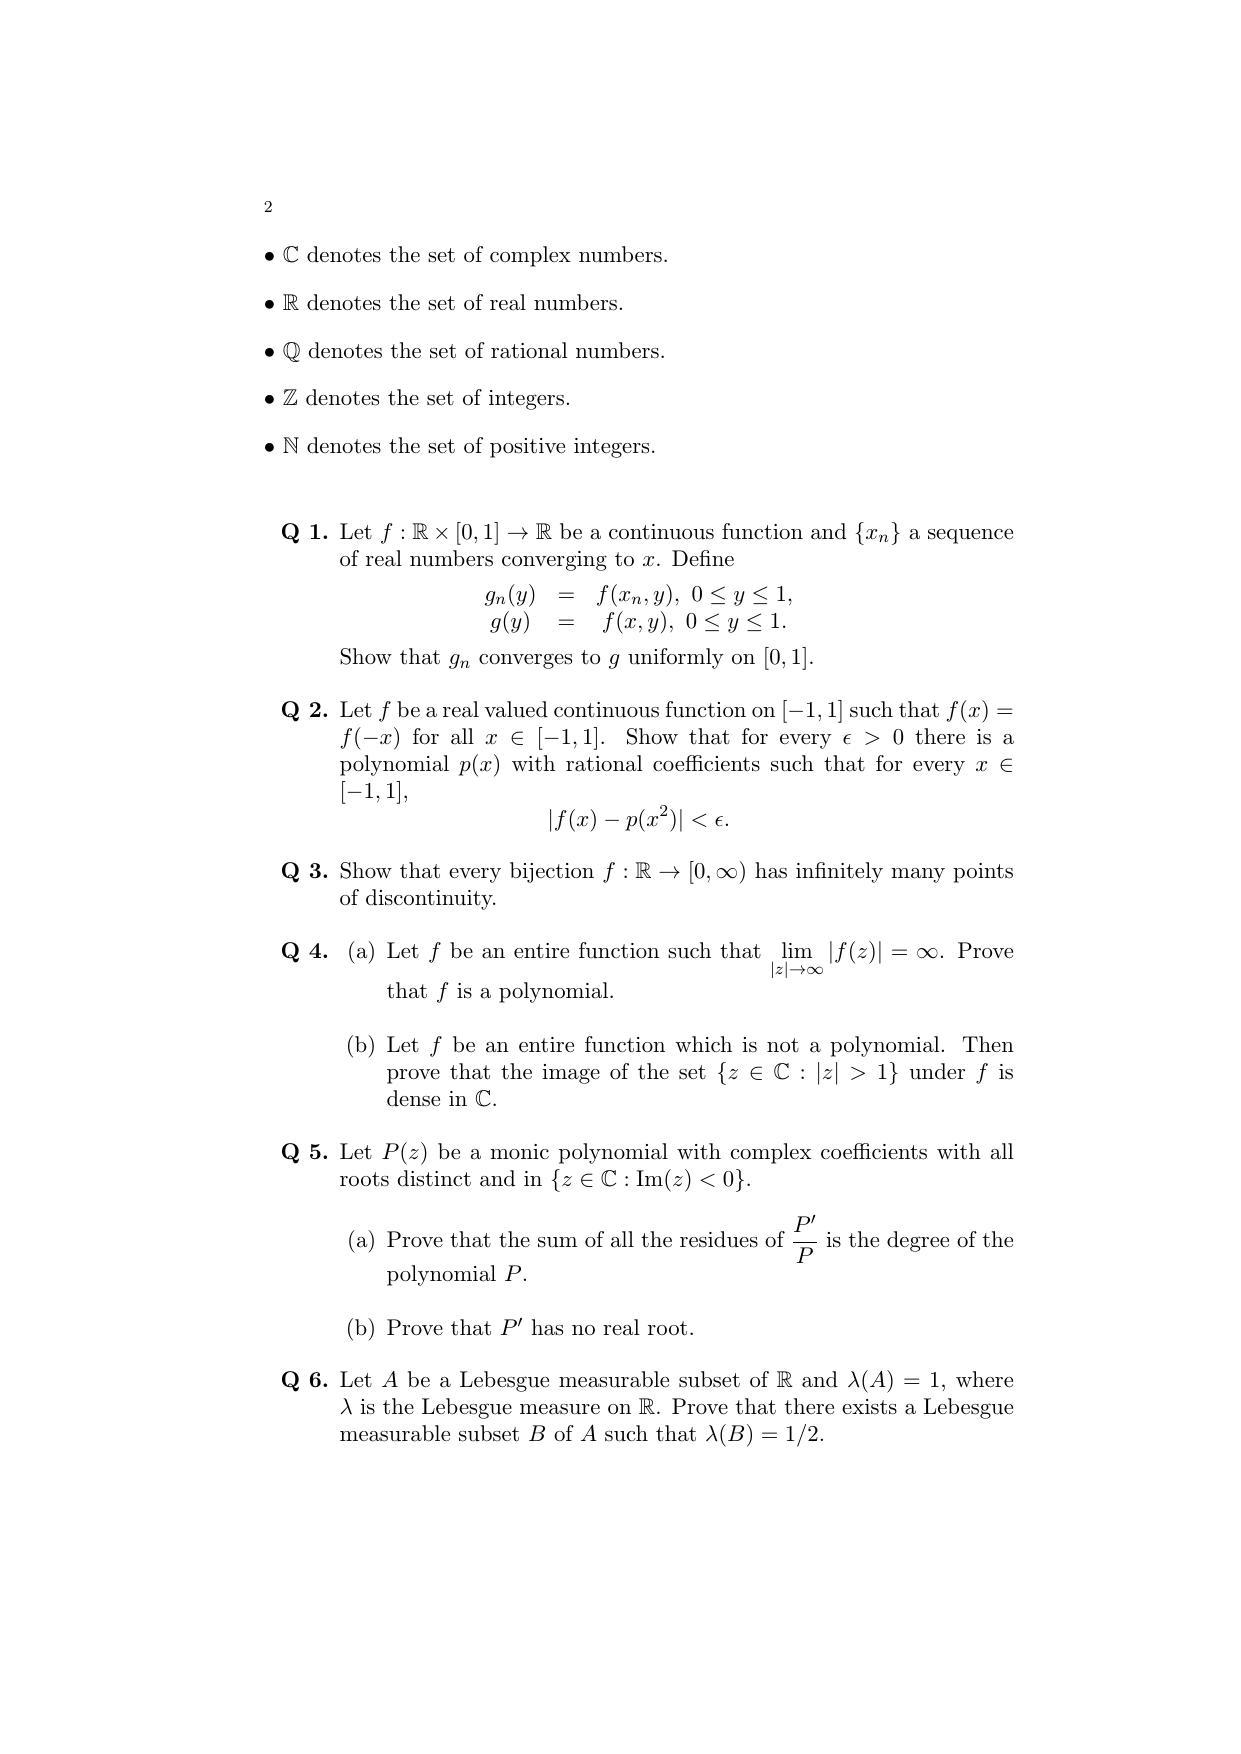 ISI Admission Test JRF in Mathematics MTA 2017 Sample Paper - Page 1